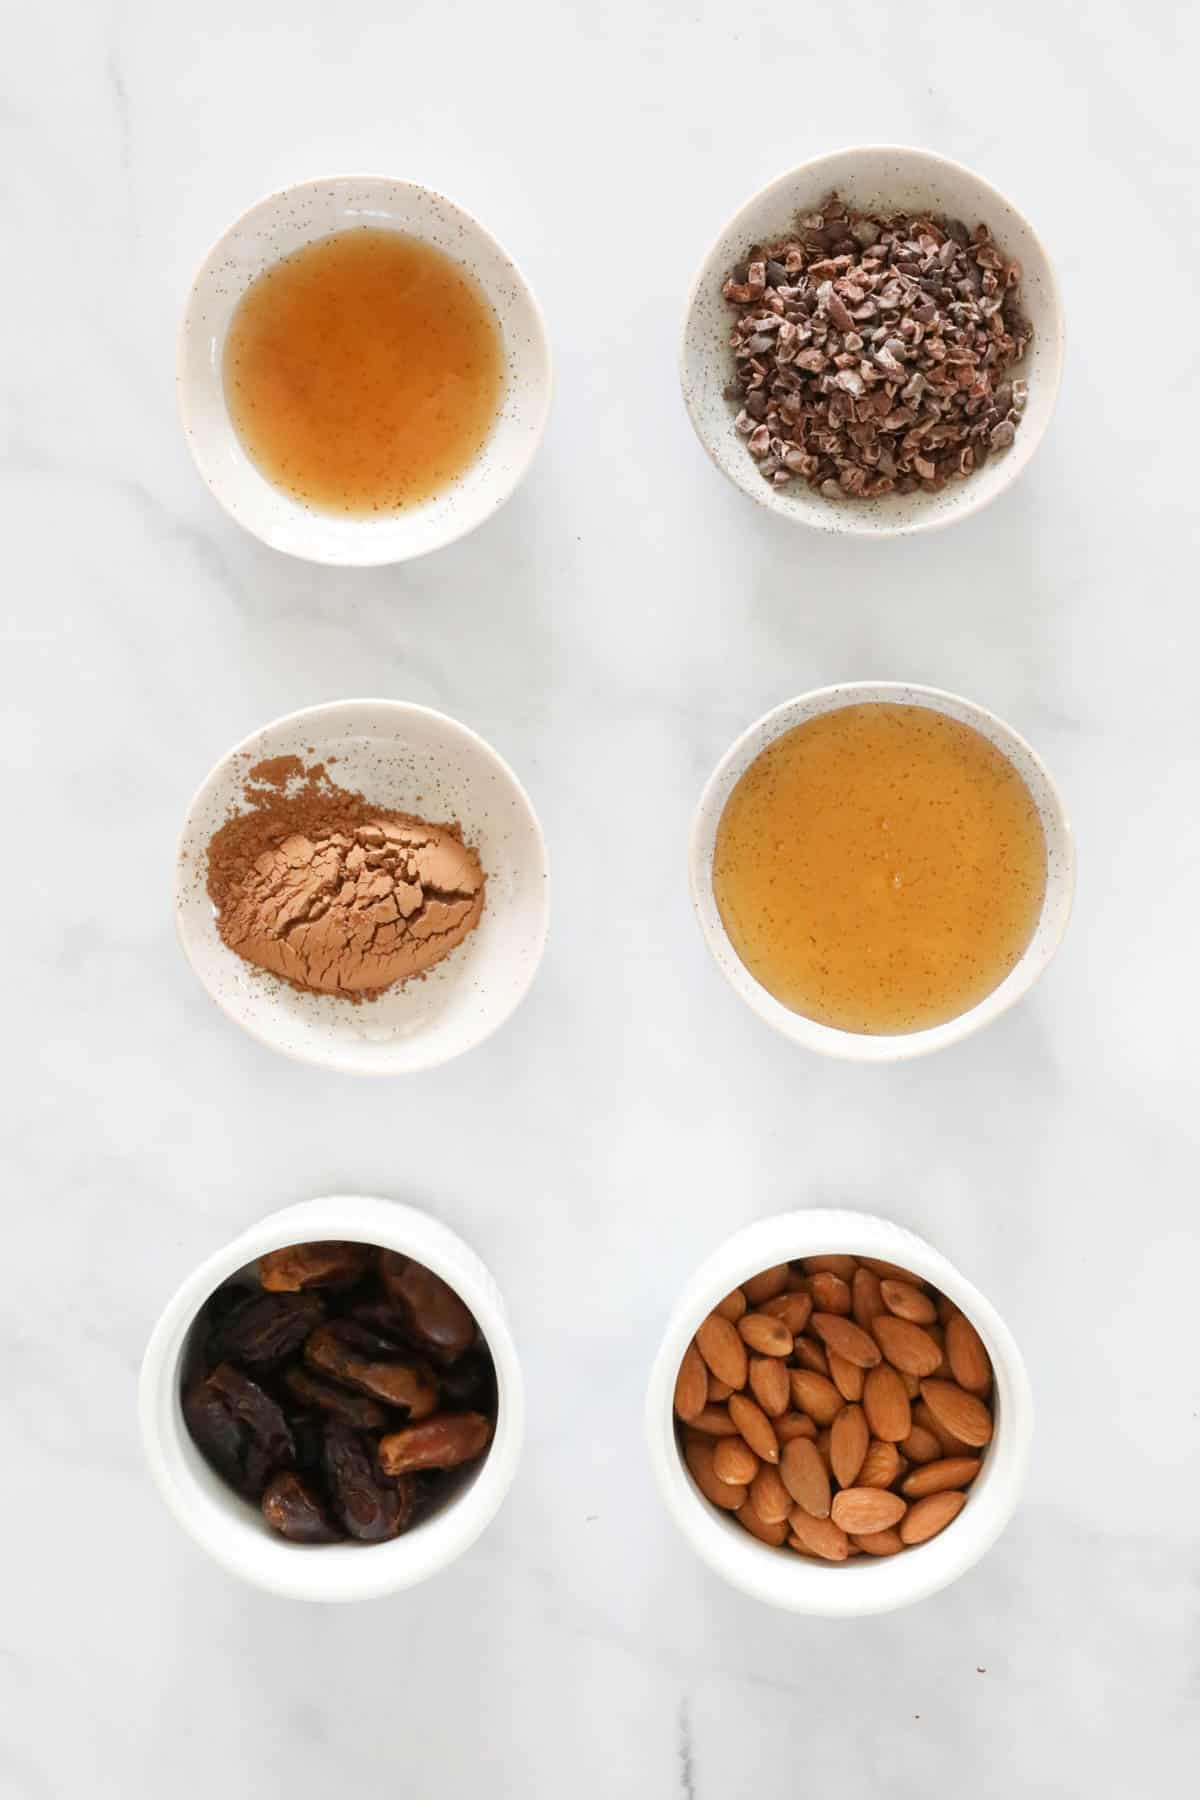 The ingredients for brownie bliss balls.